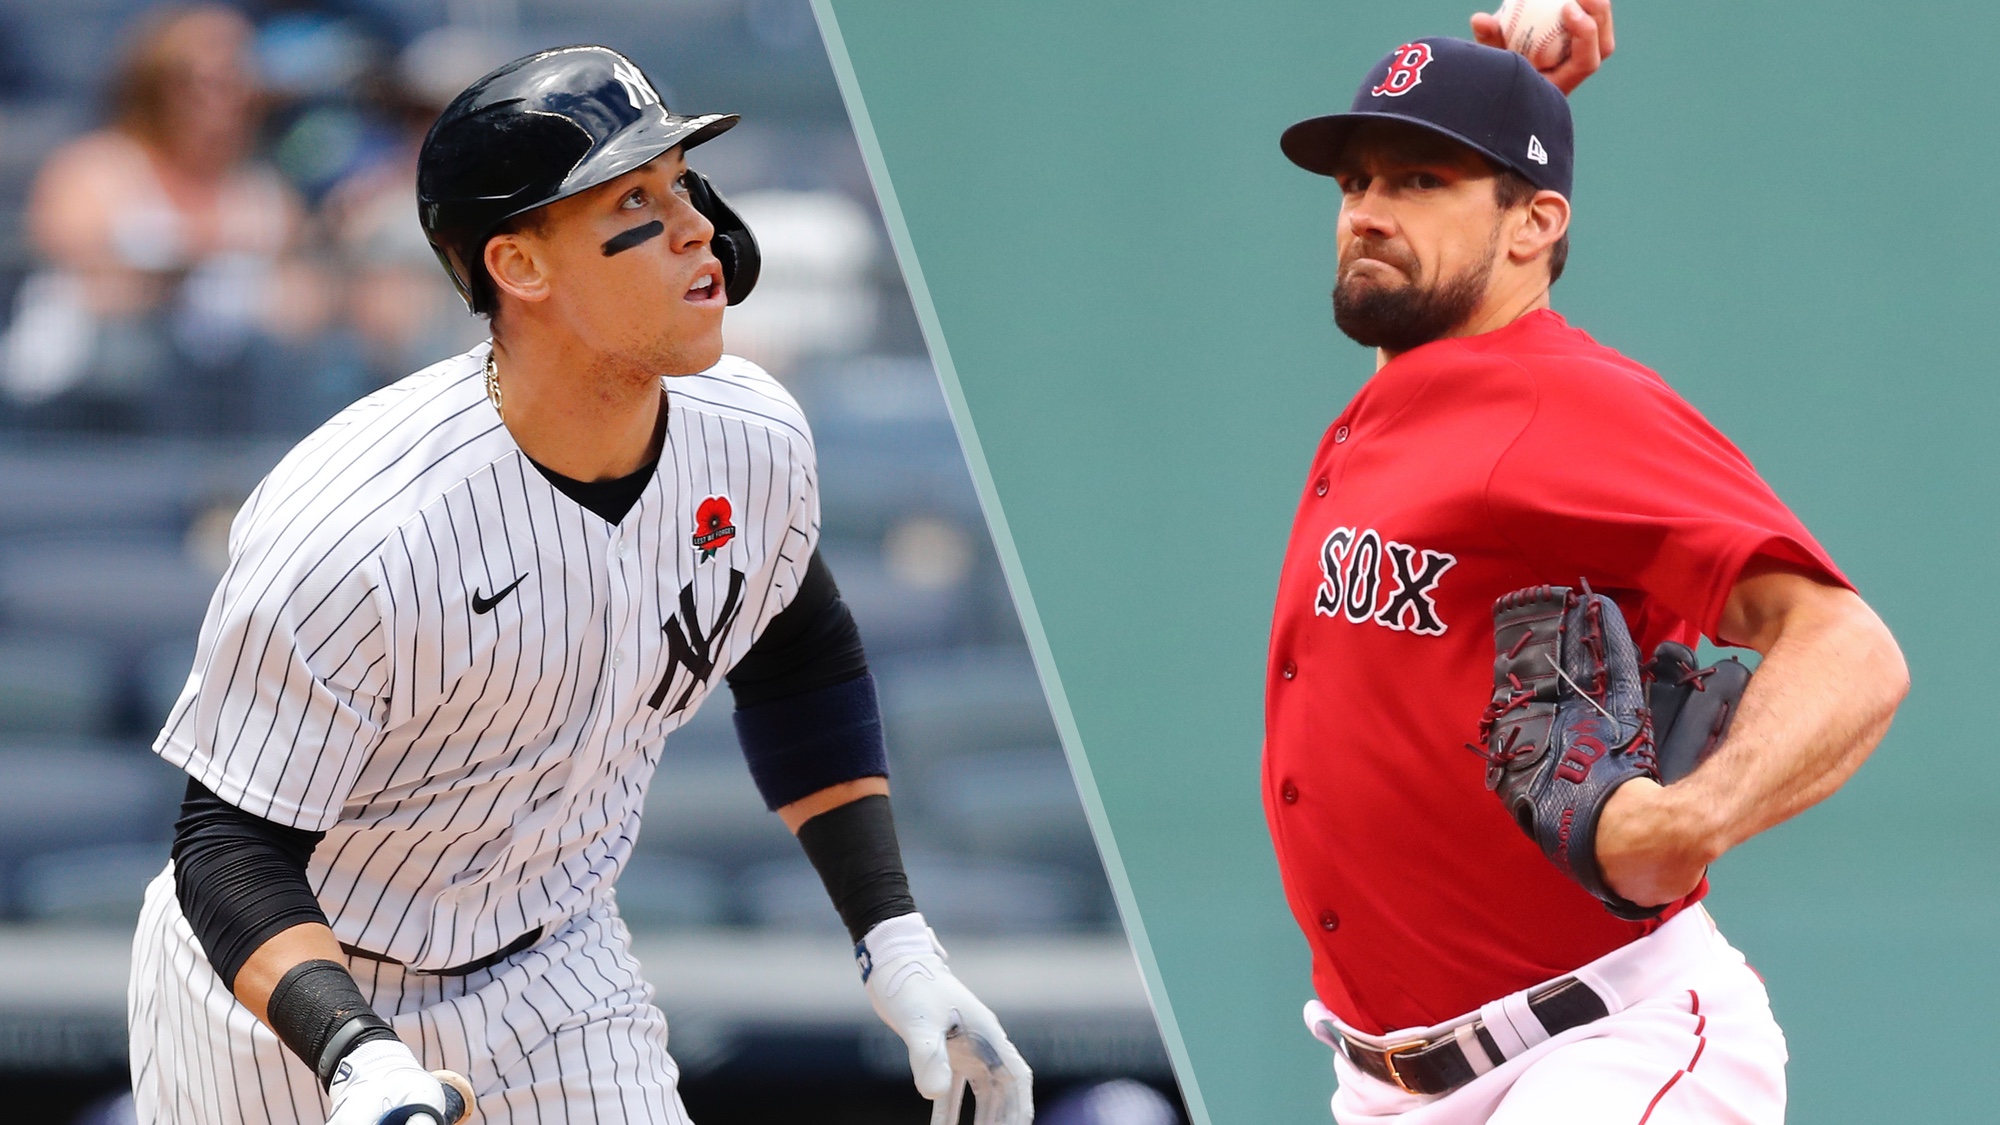 Red Sox Vs Yankees Live Streams How To Watch The Rivalry This Weekend Tom S Guide